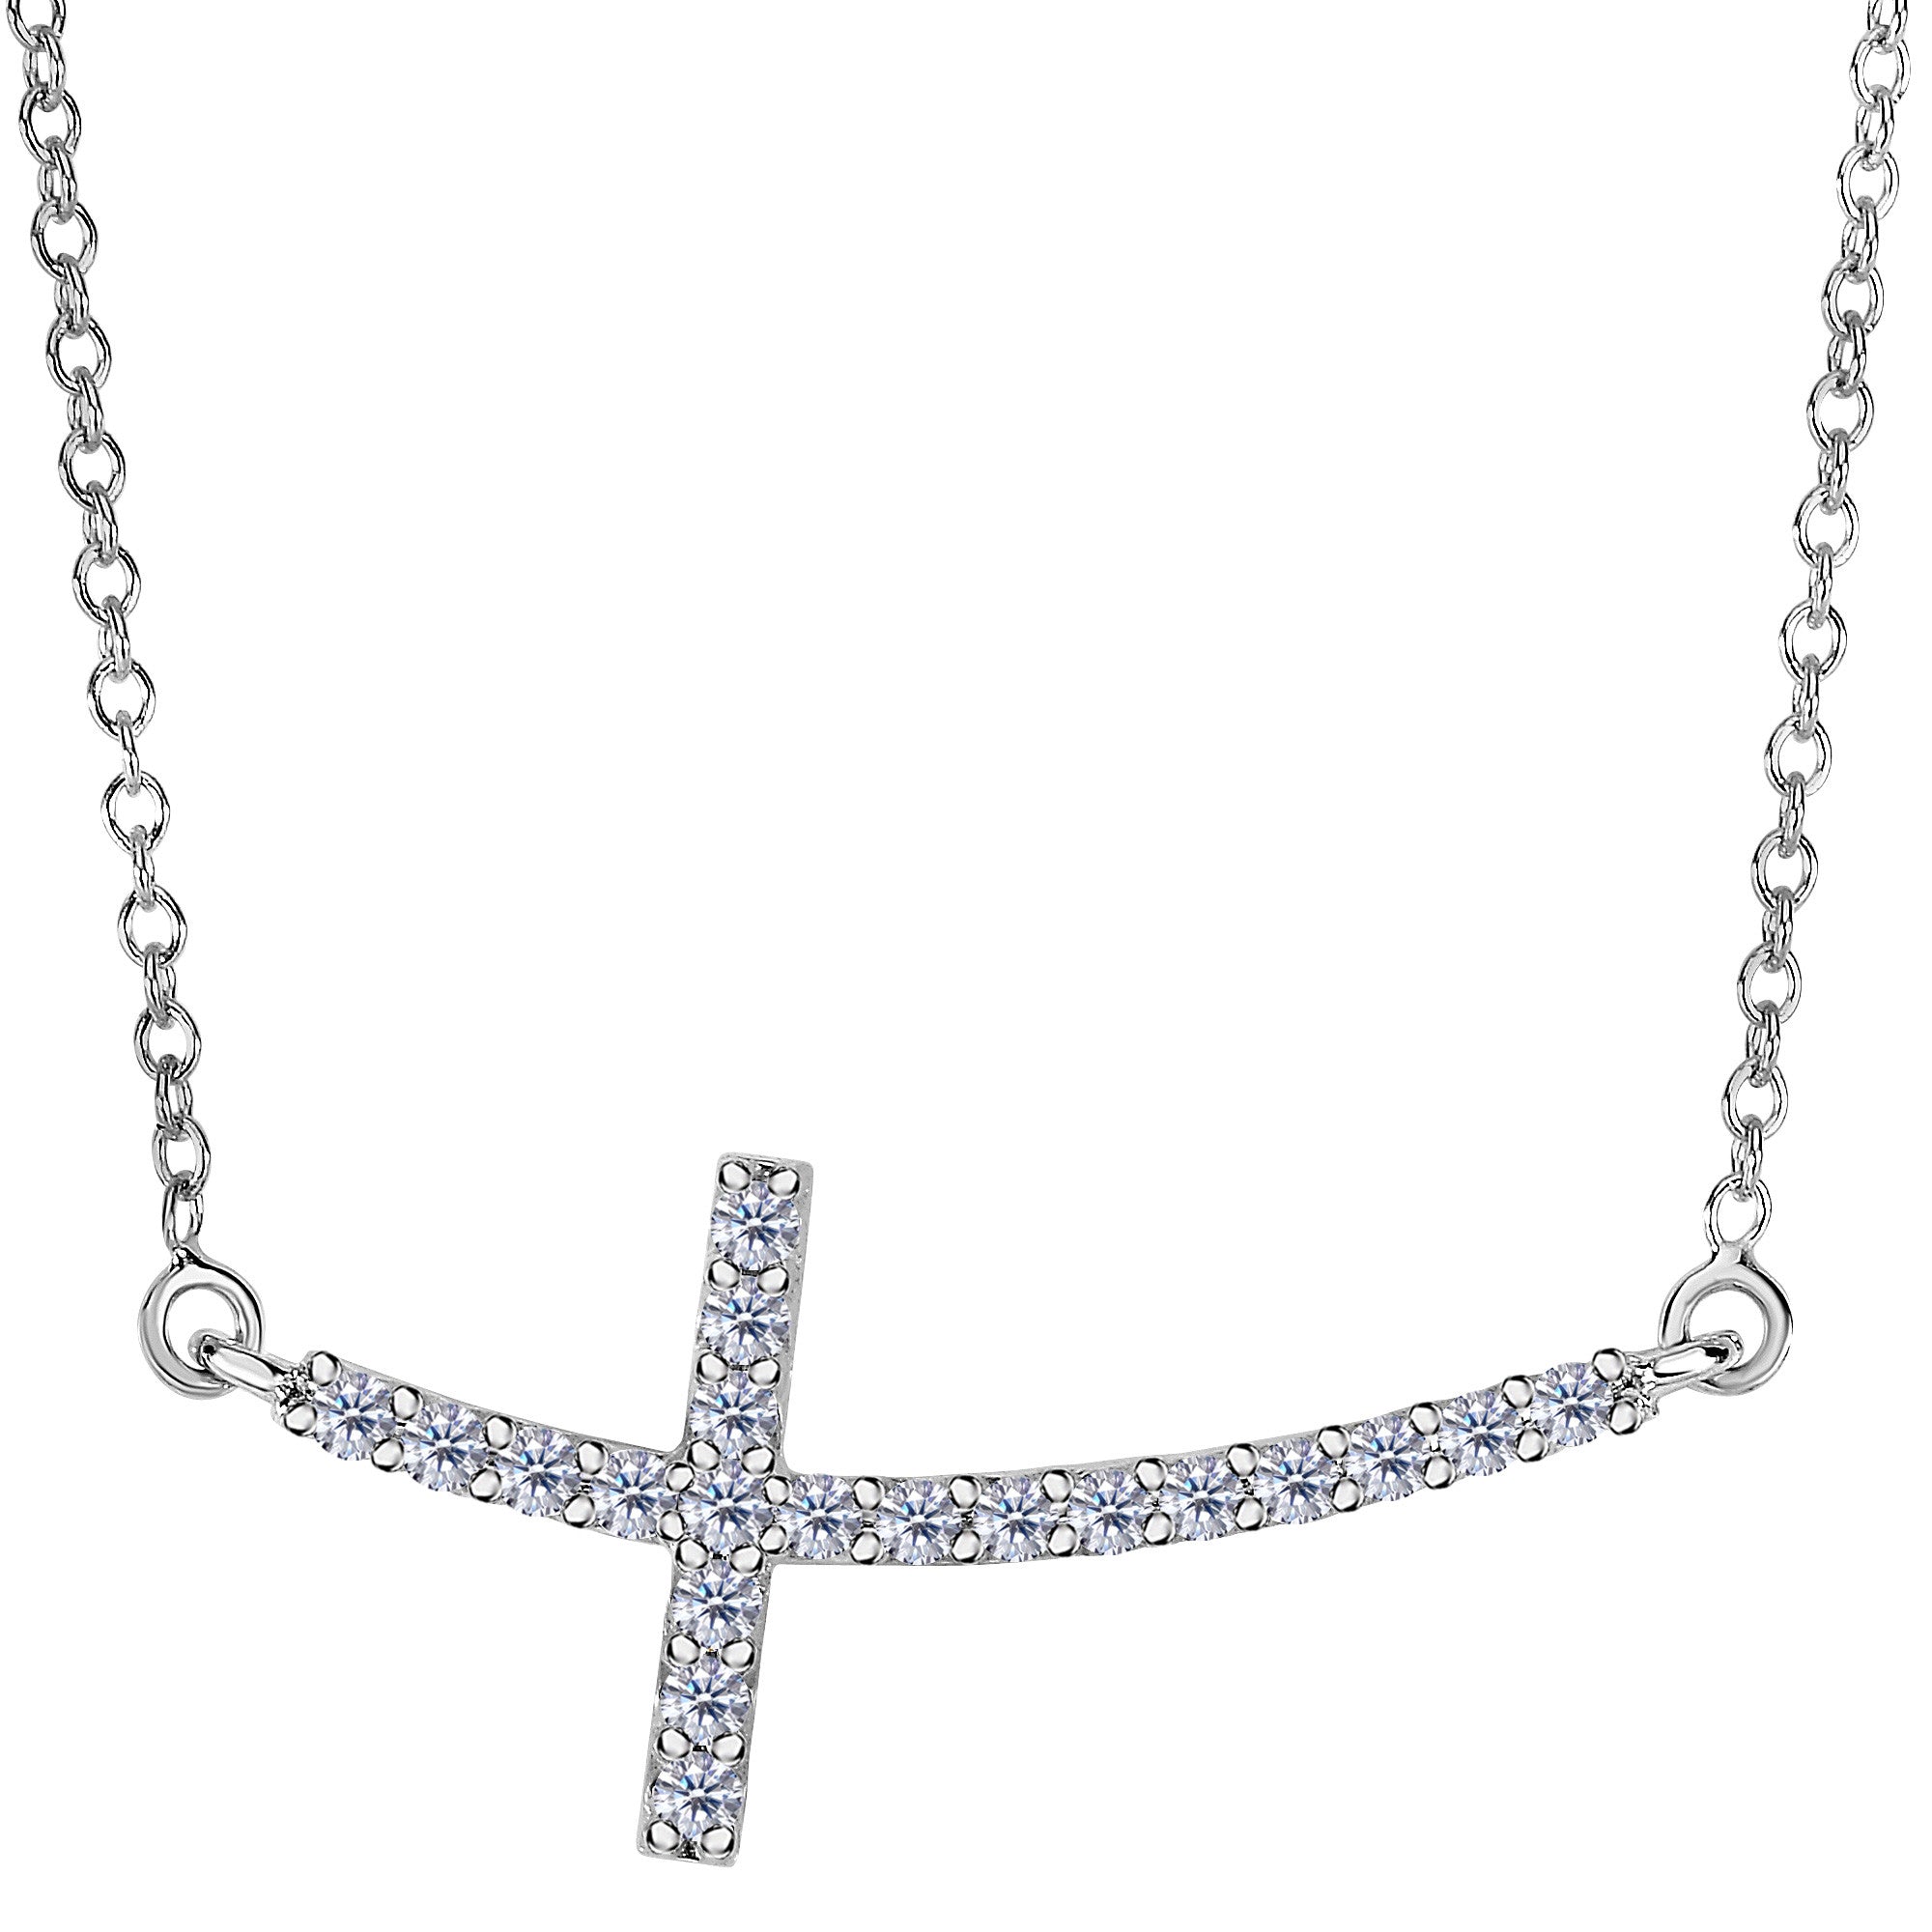 14k White Gold With 0.22ct Diamonds Curved Side Ways Cross Necklace - 18 Inches fine designer jewelry for men and women